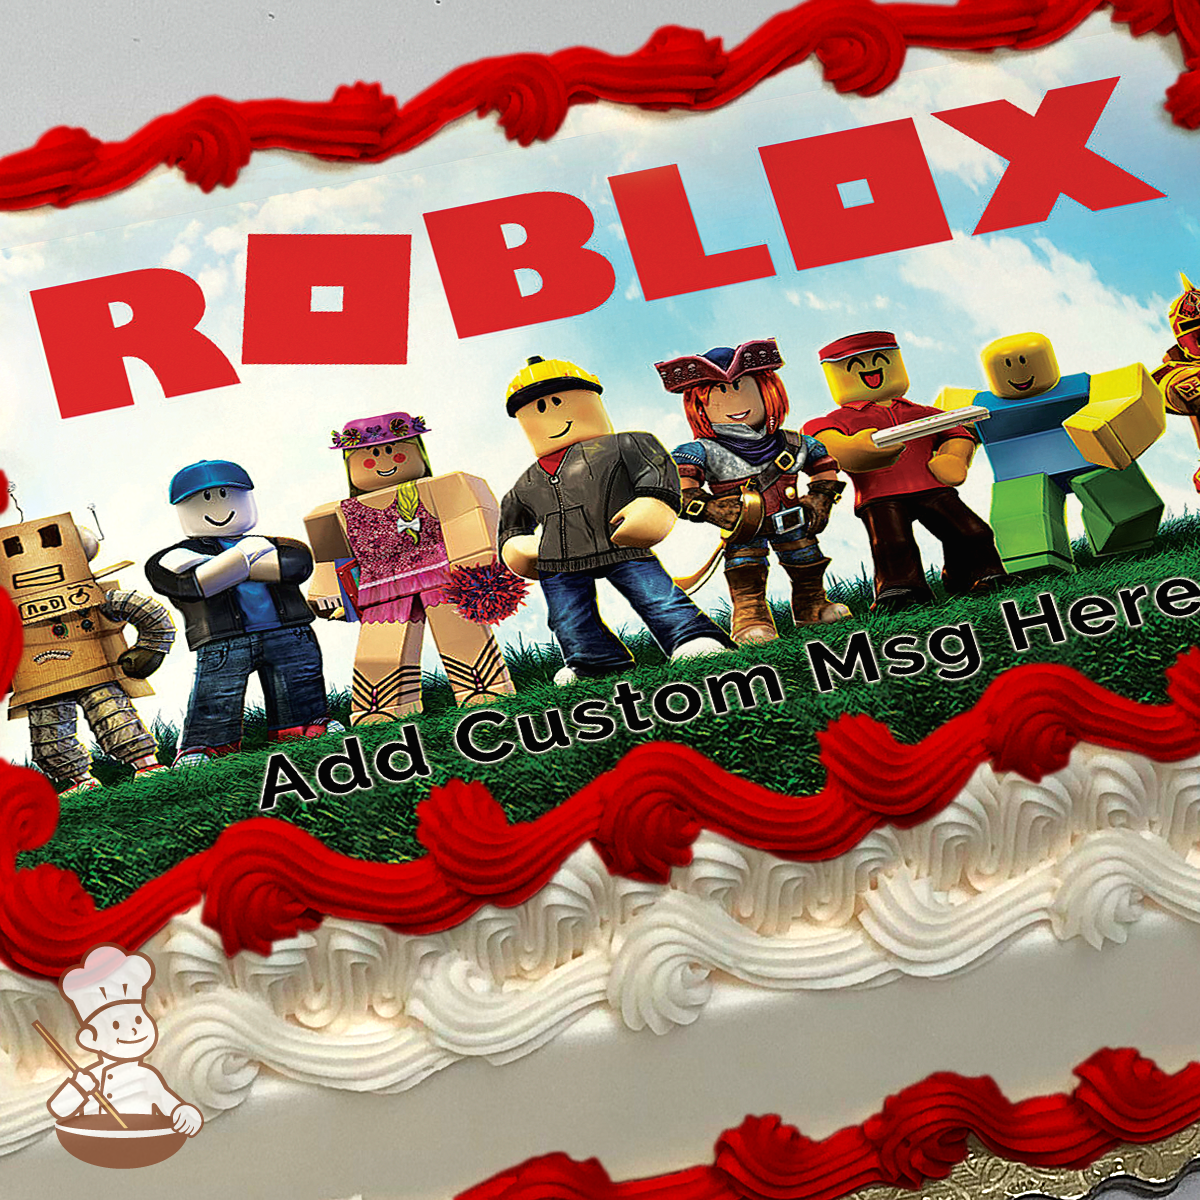 Roblox Casino designs, themes, templates and downloadable graphic